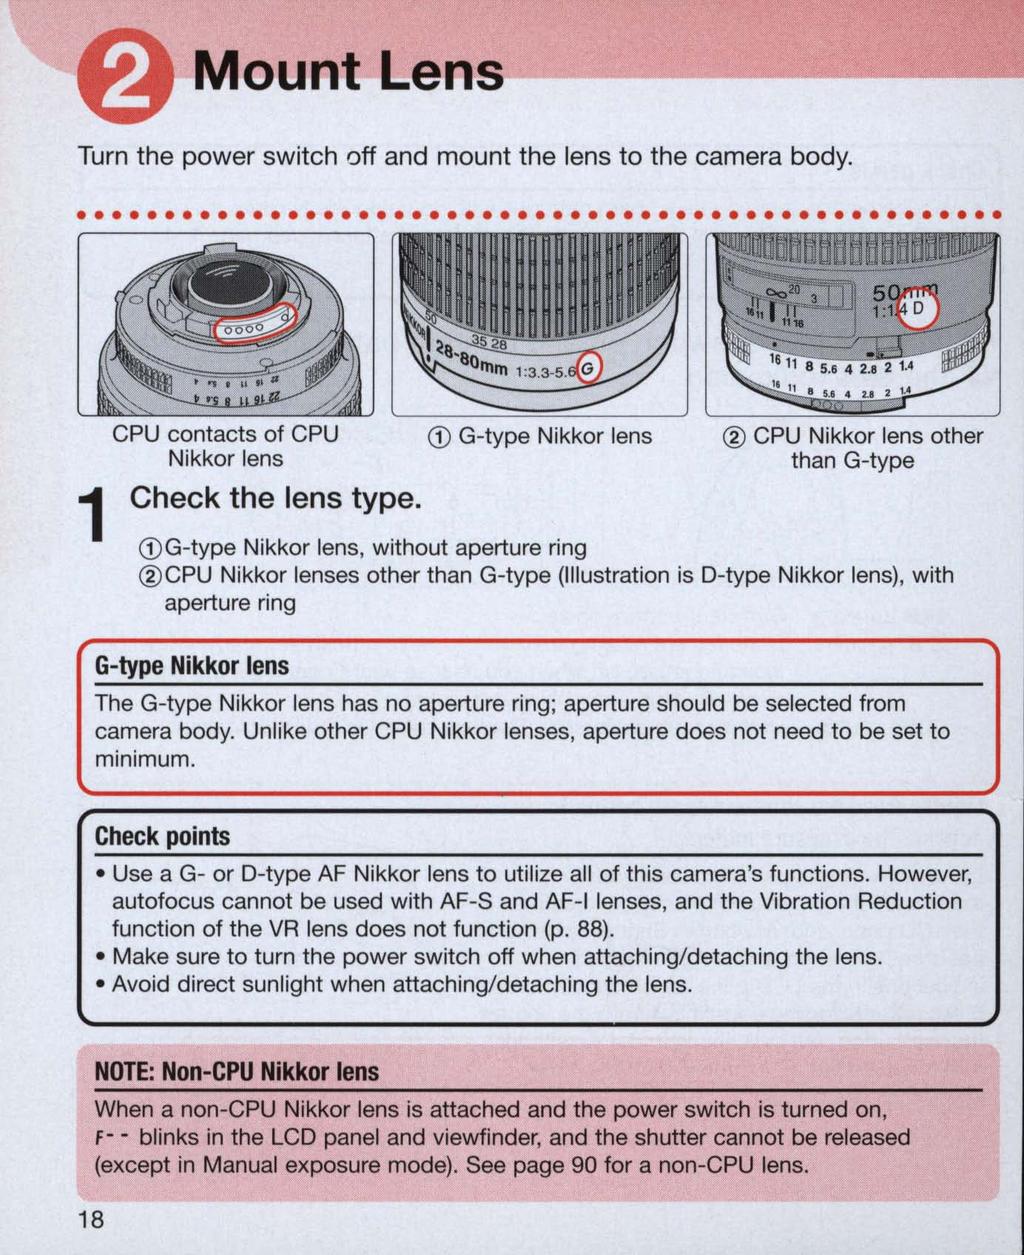 MountLens ~~------------ Turn the power switch off and mount the lens to the camera body.............................. CPU contacts of CPU CD G-type Nikkor lens Nikkor lens Check the lens type.